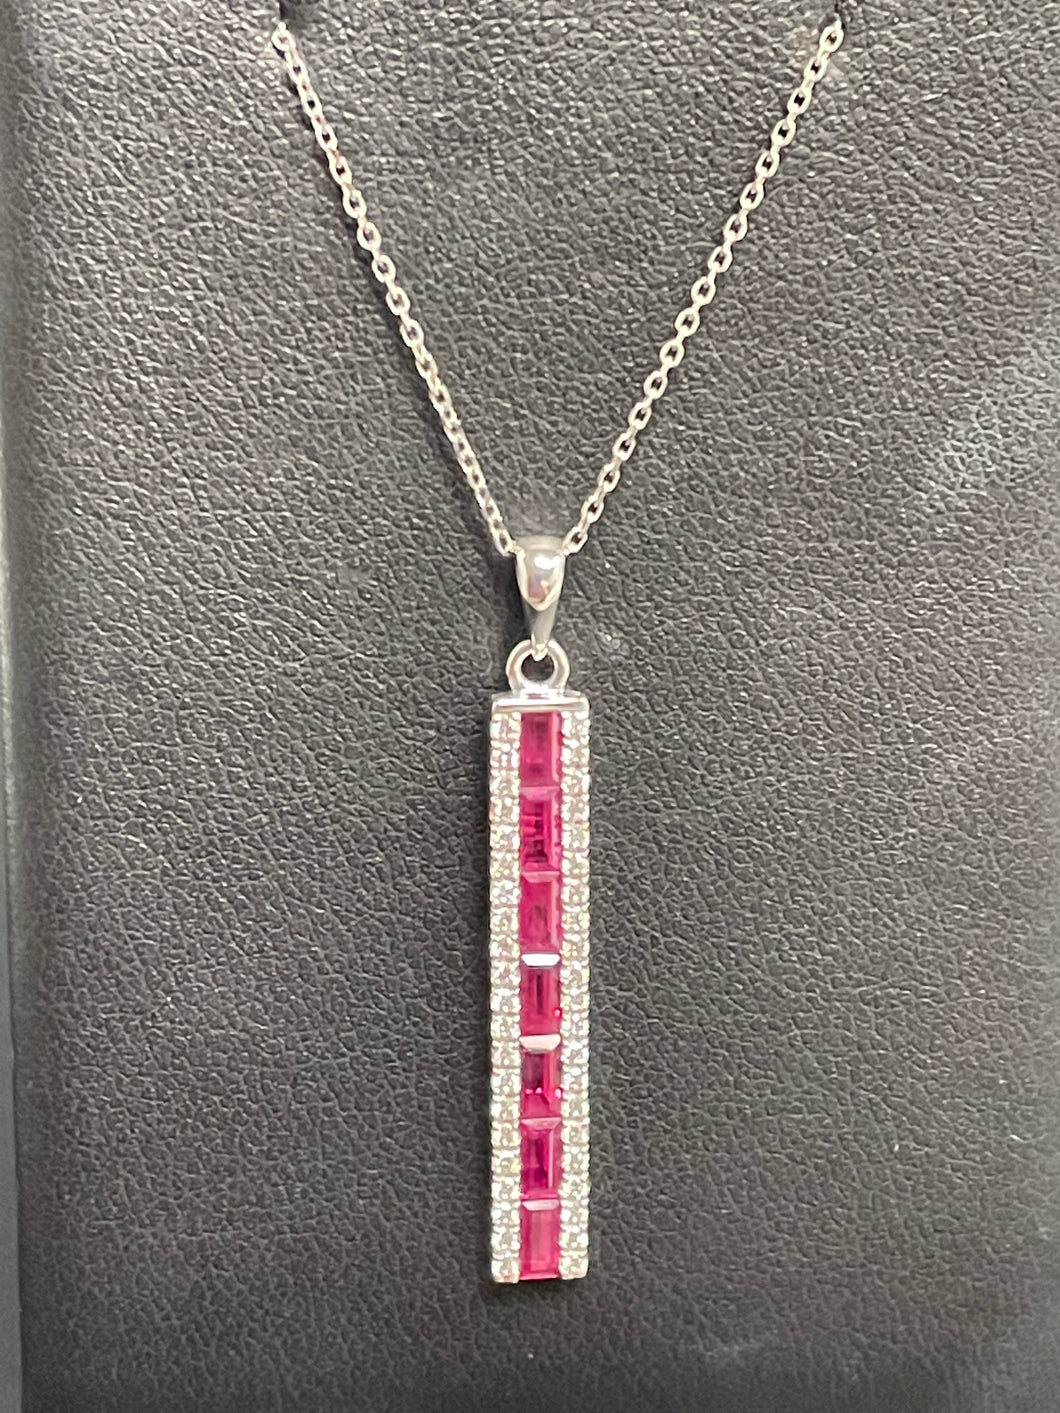 One Ladies 14k White Gold Diamond and Ruby Necklace